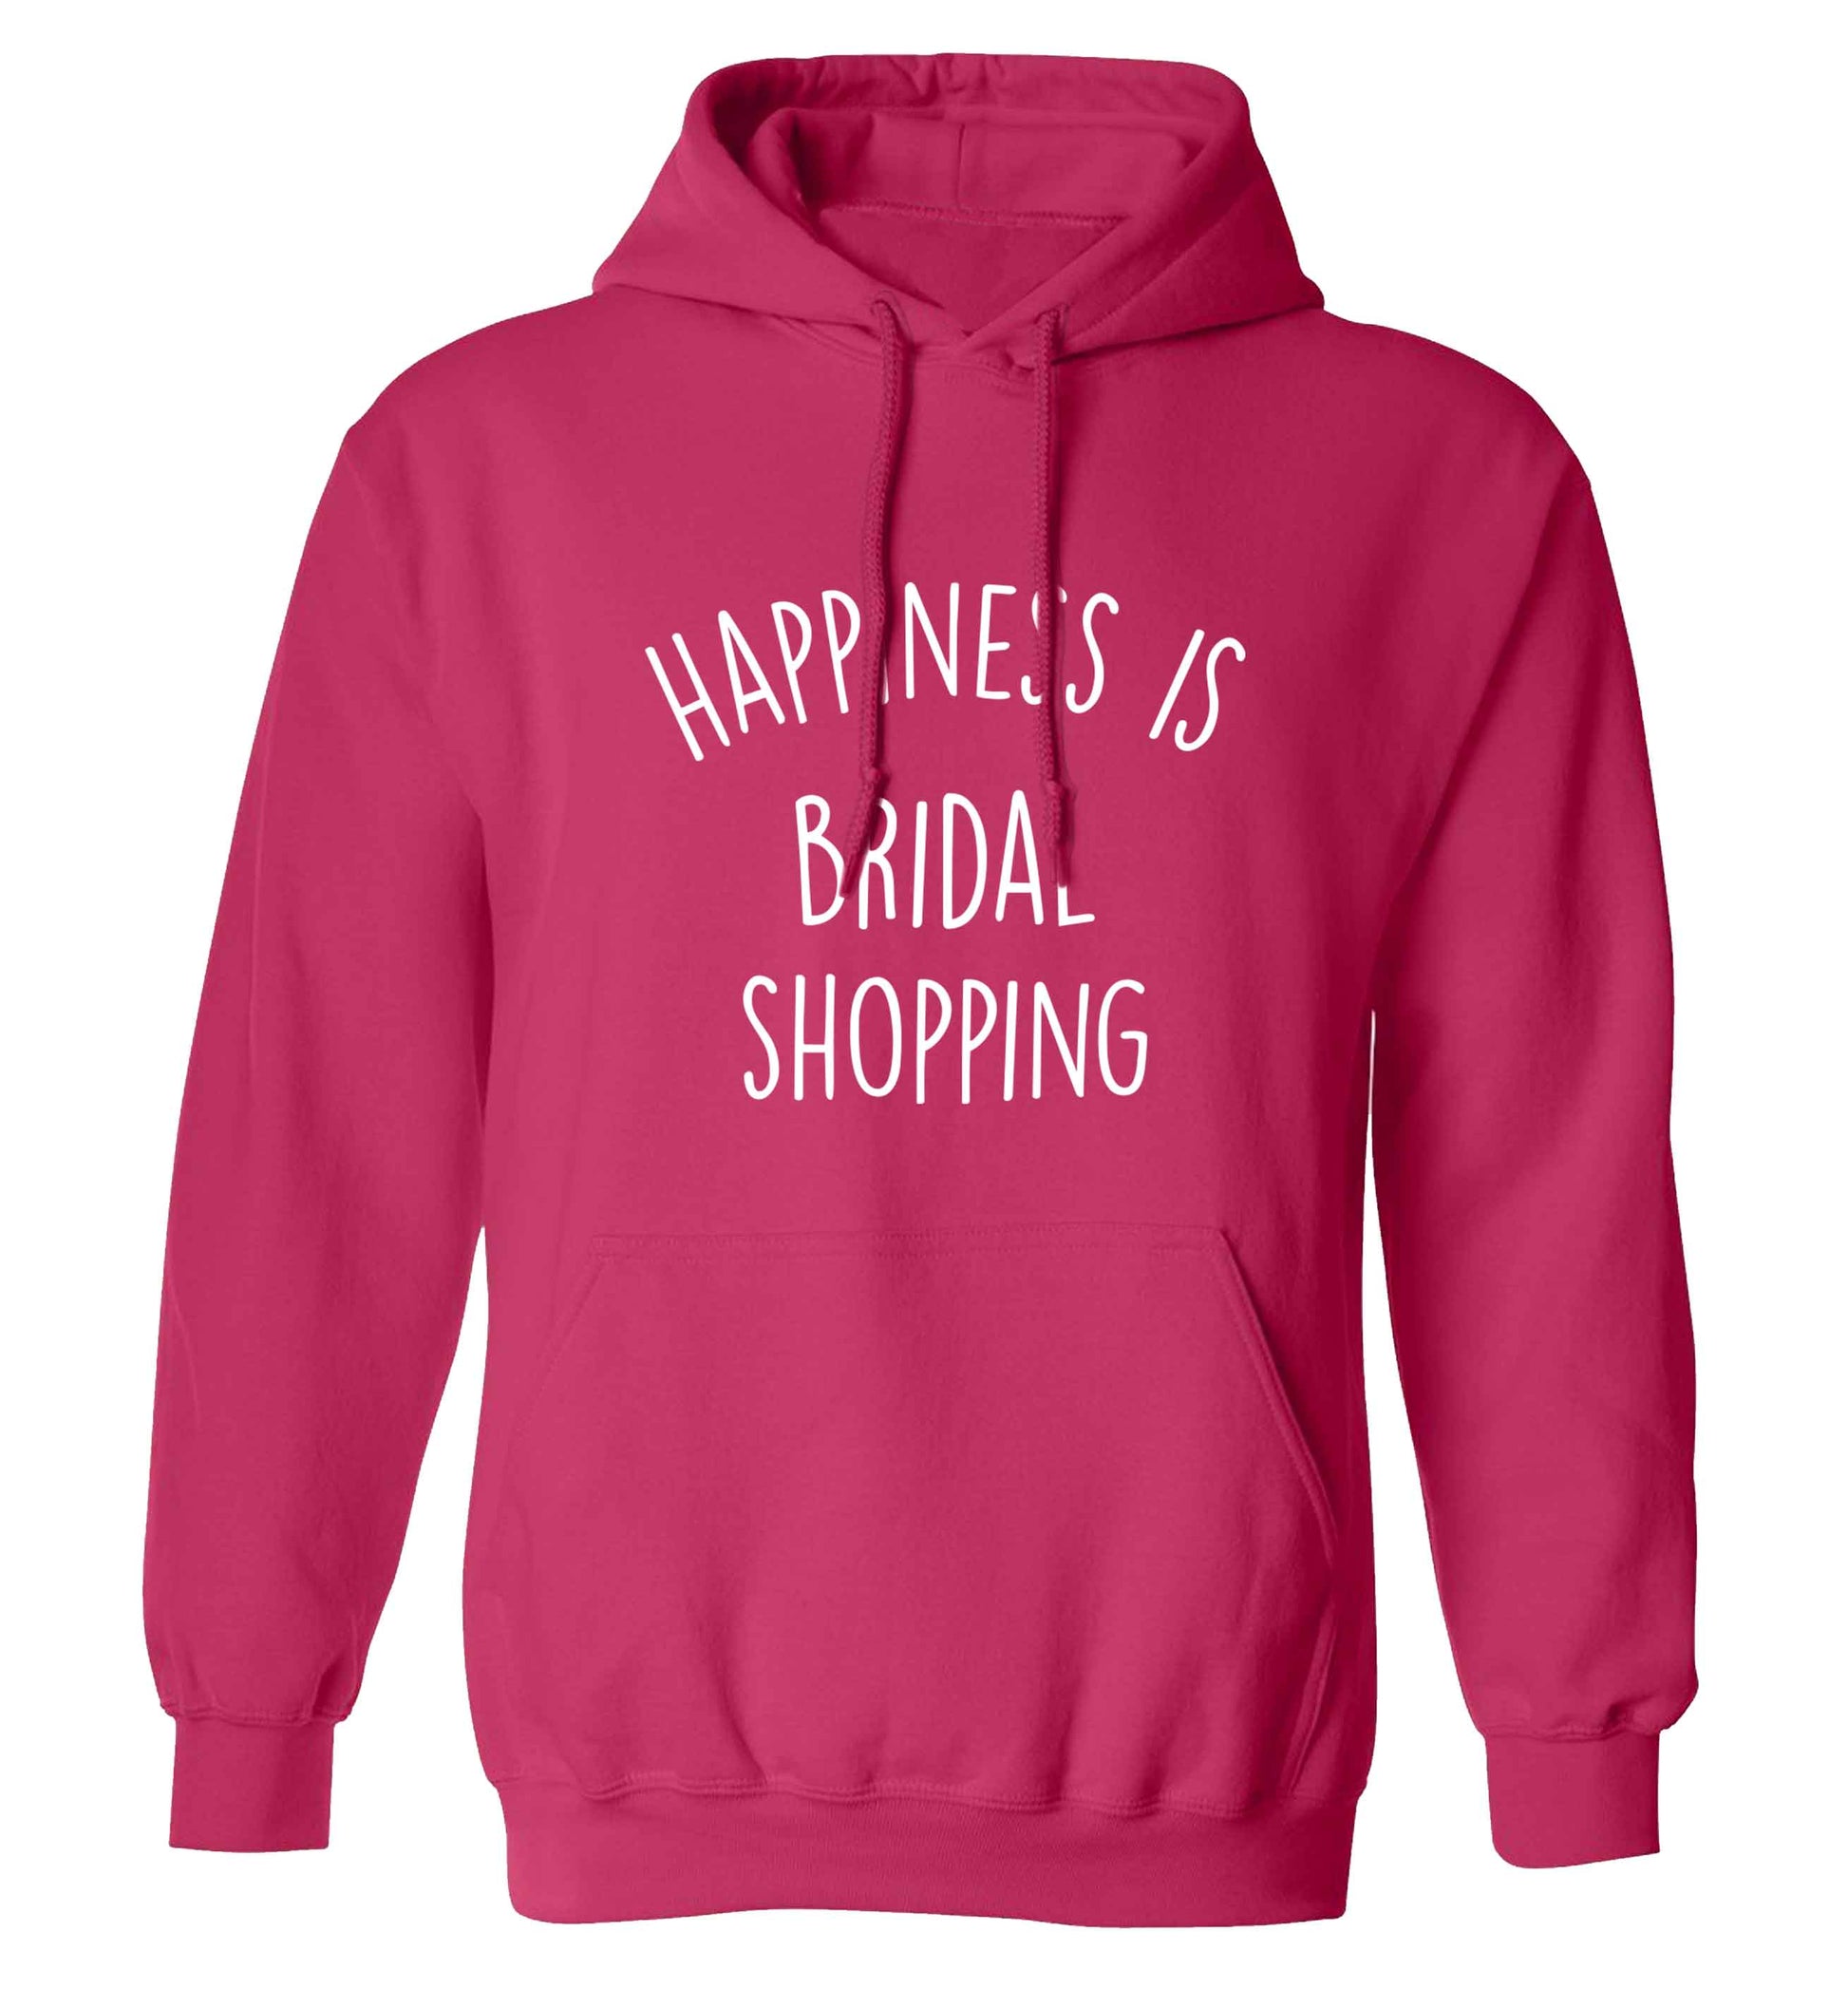 Happiness is bridal shopping adults unisex pink hoodie 2XL